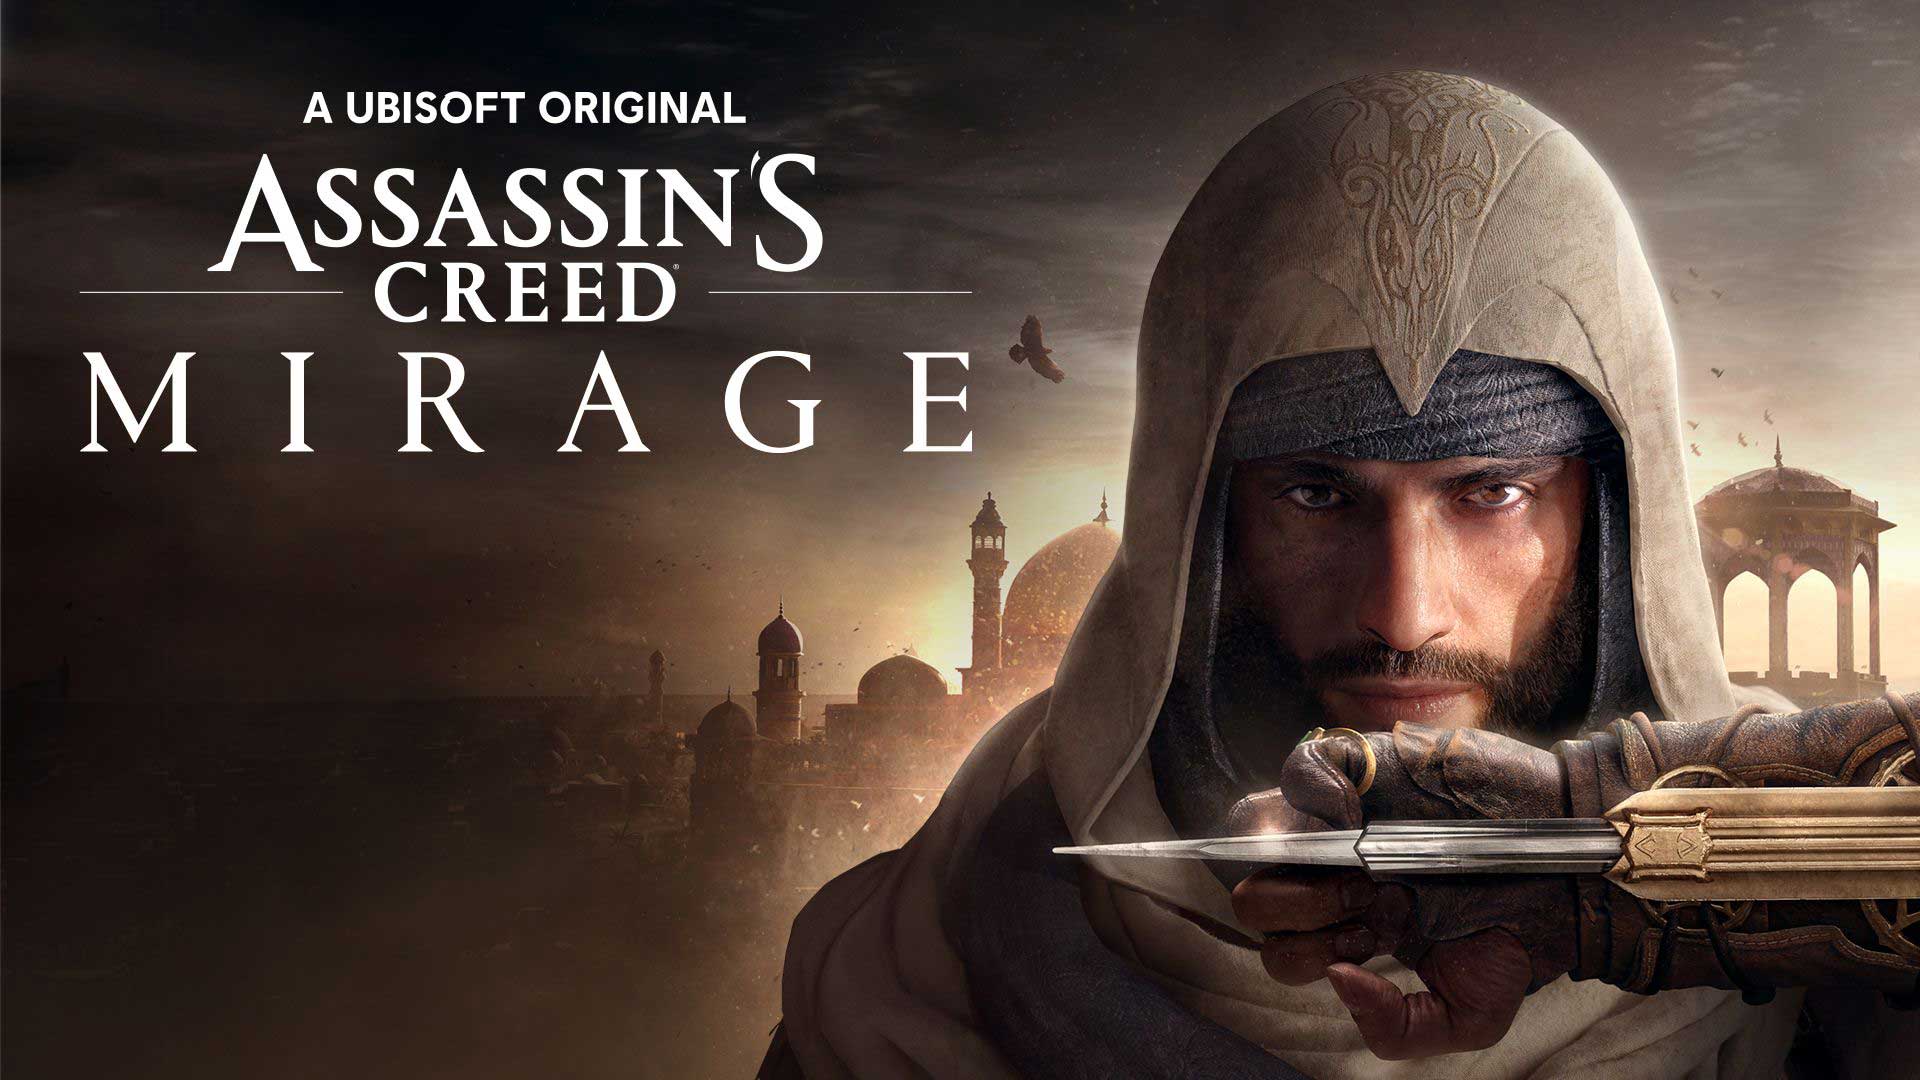 Assassin’s Creed Mirage, The Gamers Fate, thegamersfate.com